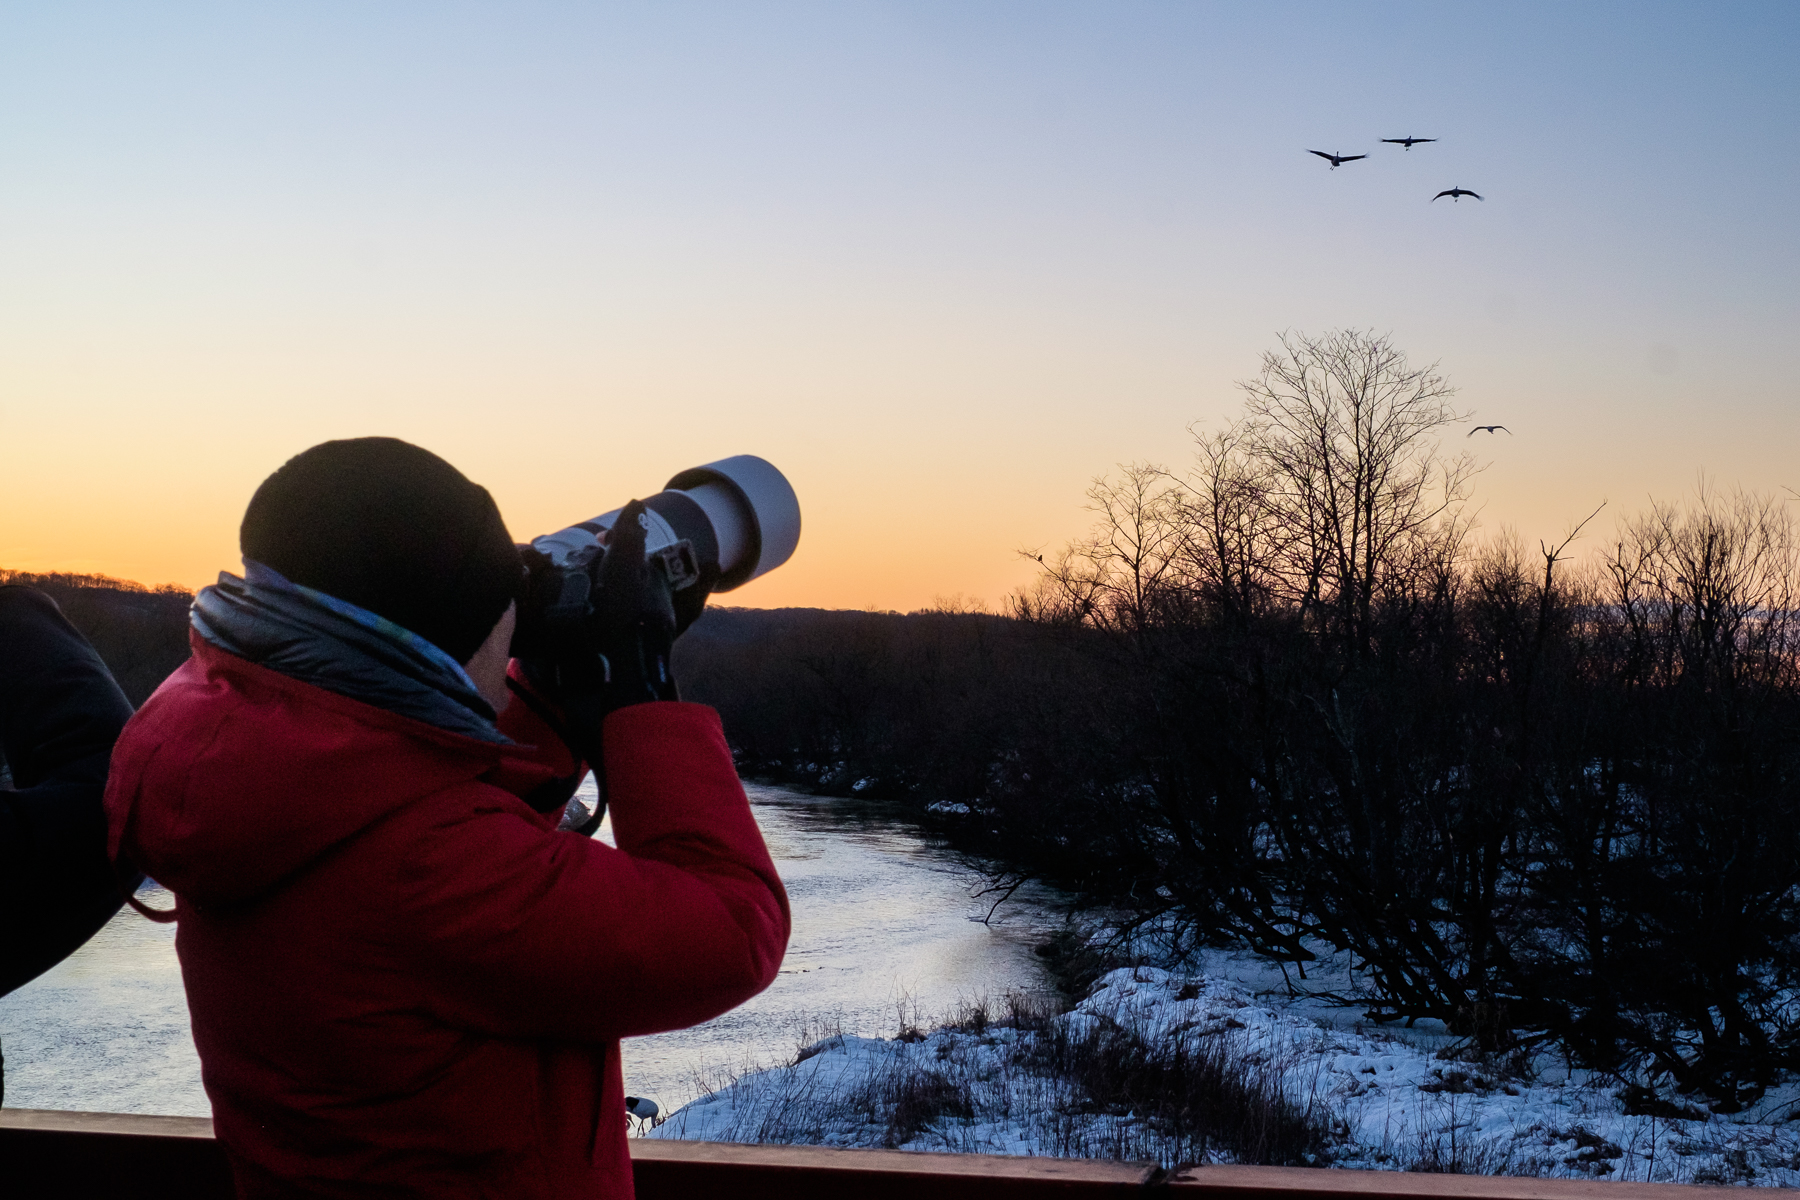 A man at dawn on a midwinter morning points a zoom lens towards three red-crowned cranes flying in the distance. He is standing on a bridge over an icy river.